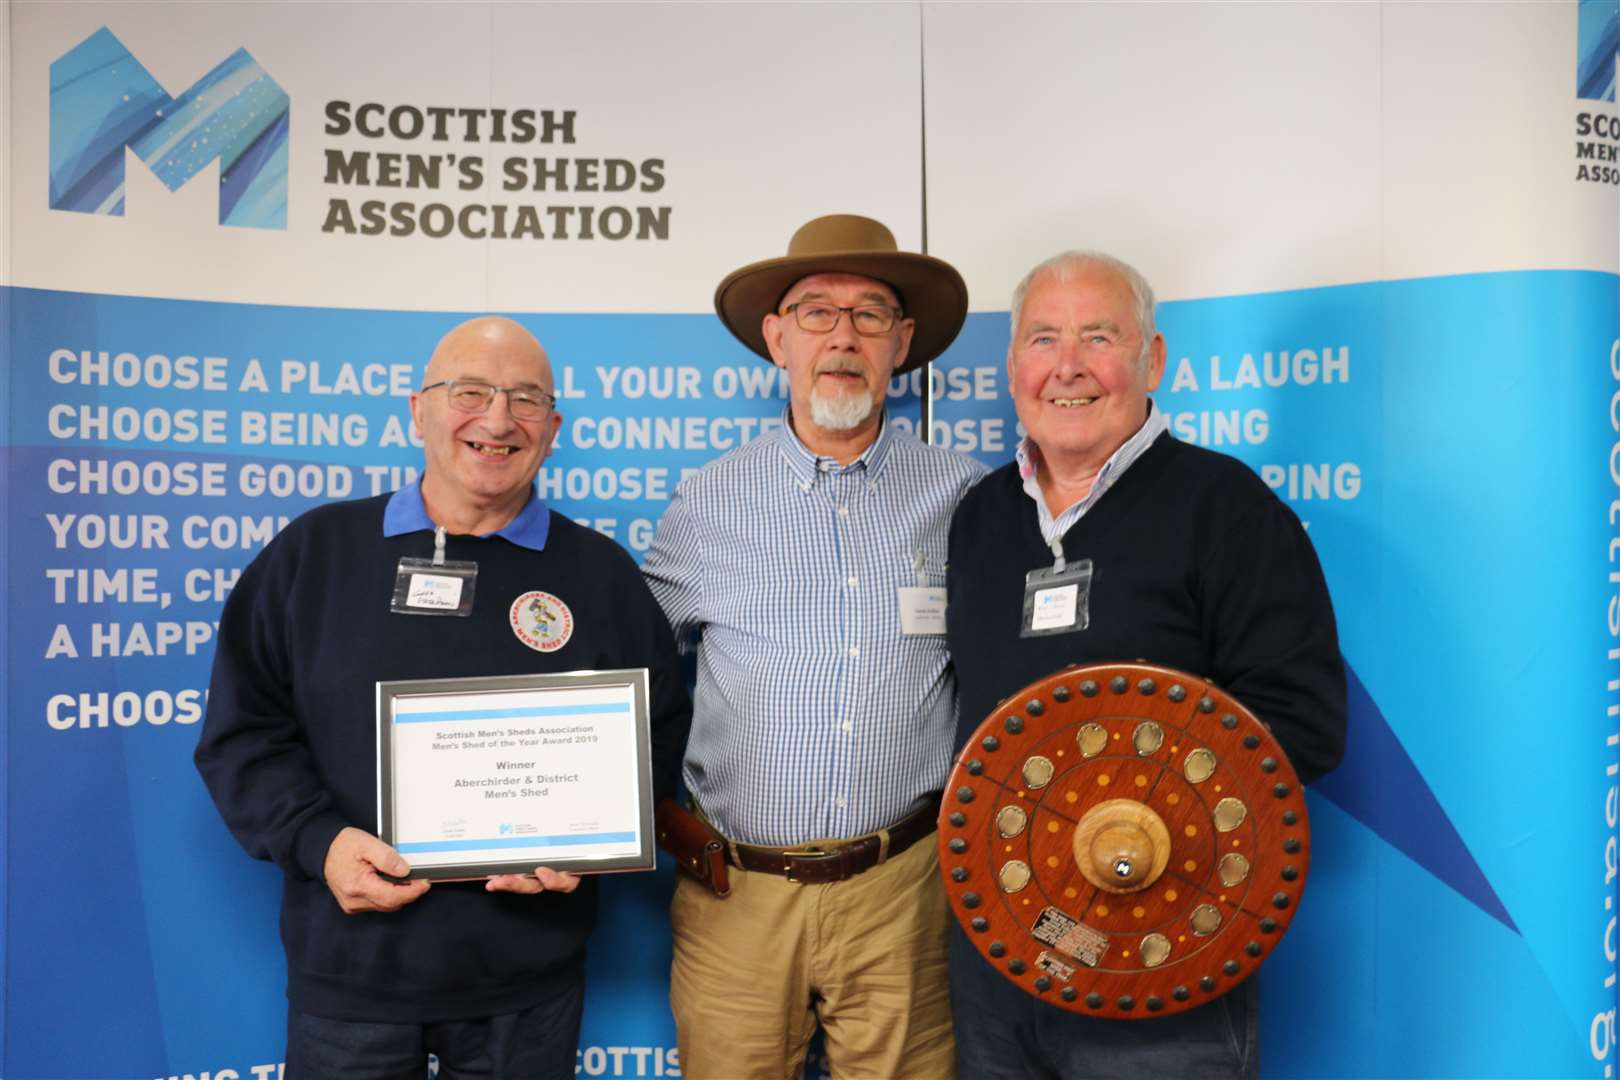 James Paterson, Derek Keiller and Mike O'Brien celebrate the award.